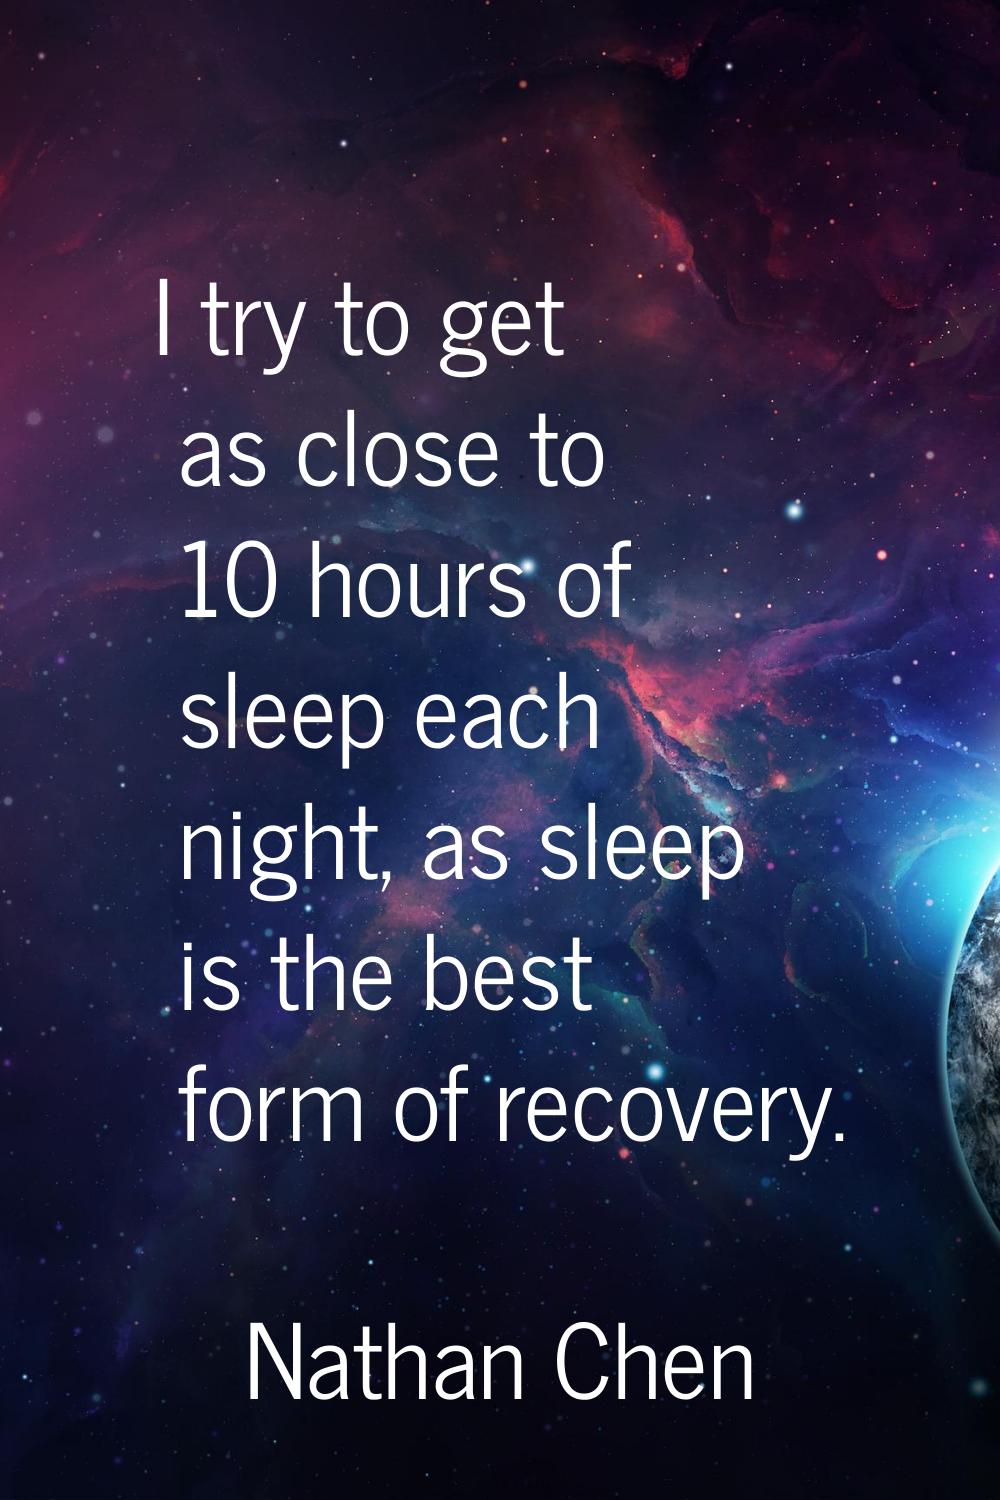 I try to get as close to 10 hours of sleep each night, as sleep is the best form of recovery.